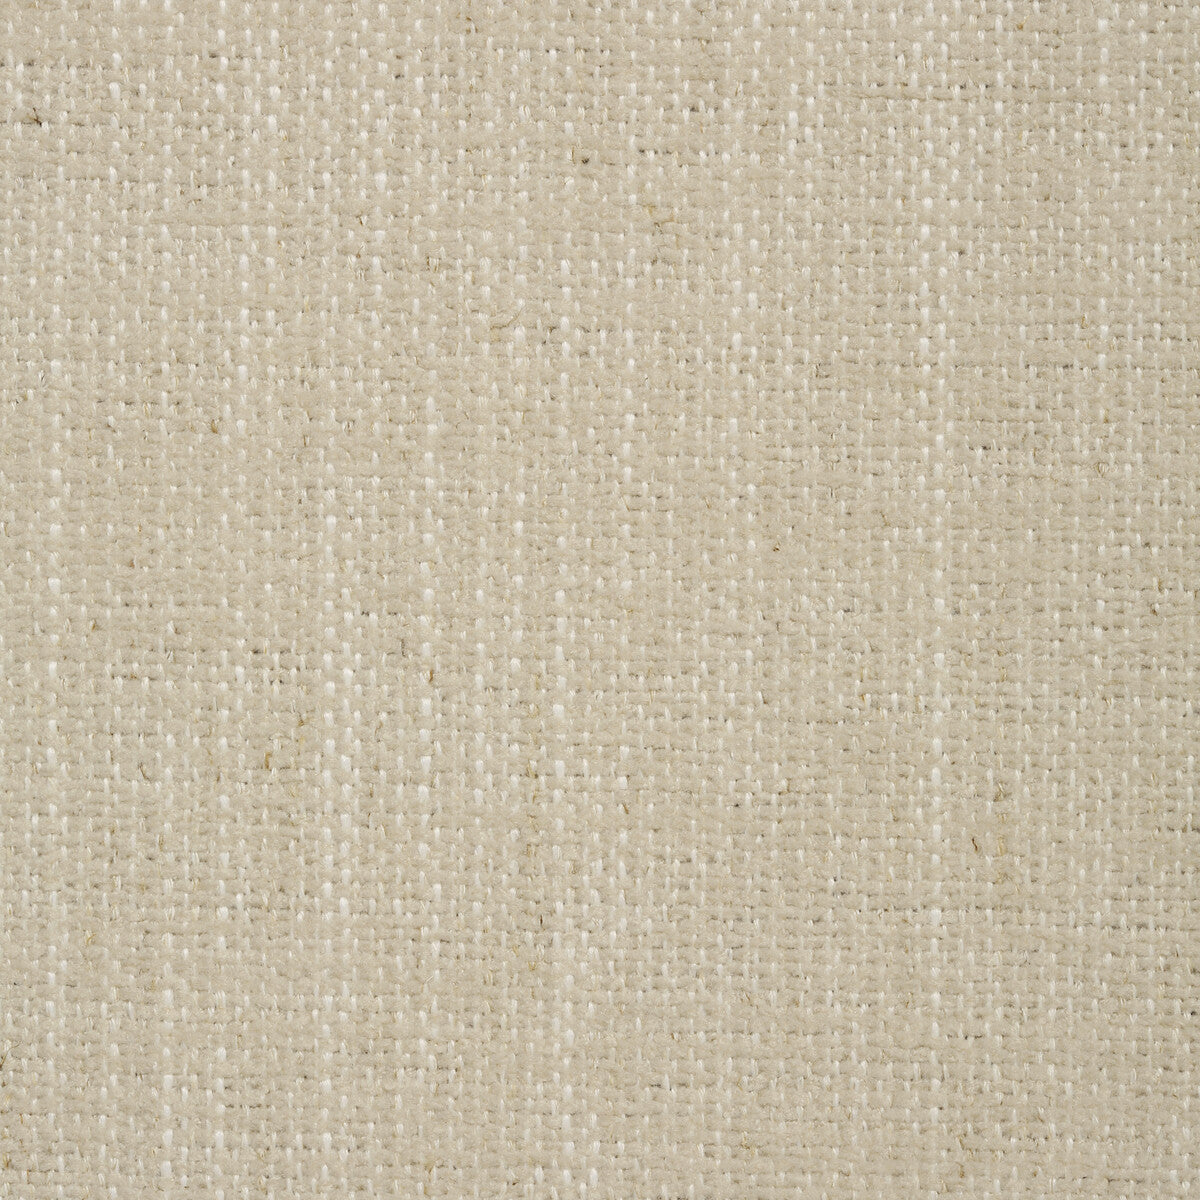 Kravet Contract fabric in 35112-1116 color - pattern 35112.1116.0 - by Kravet Contract in the Crypton Incase collection